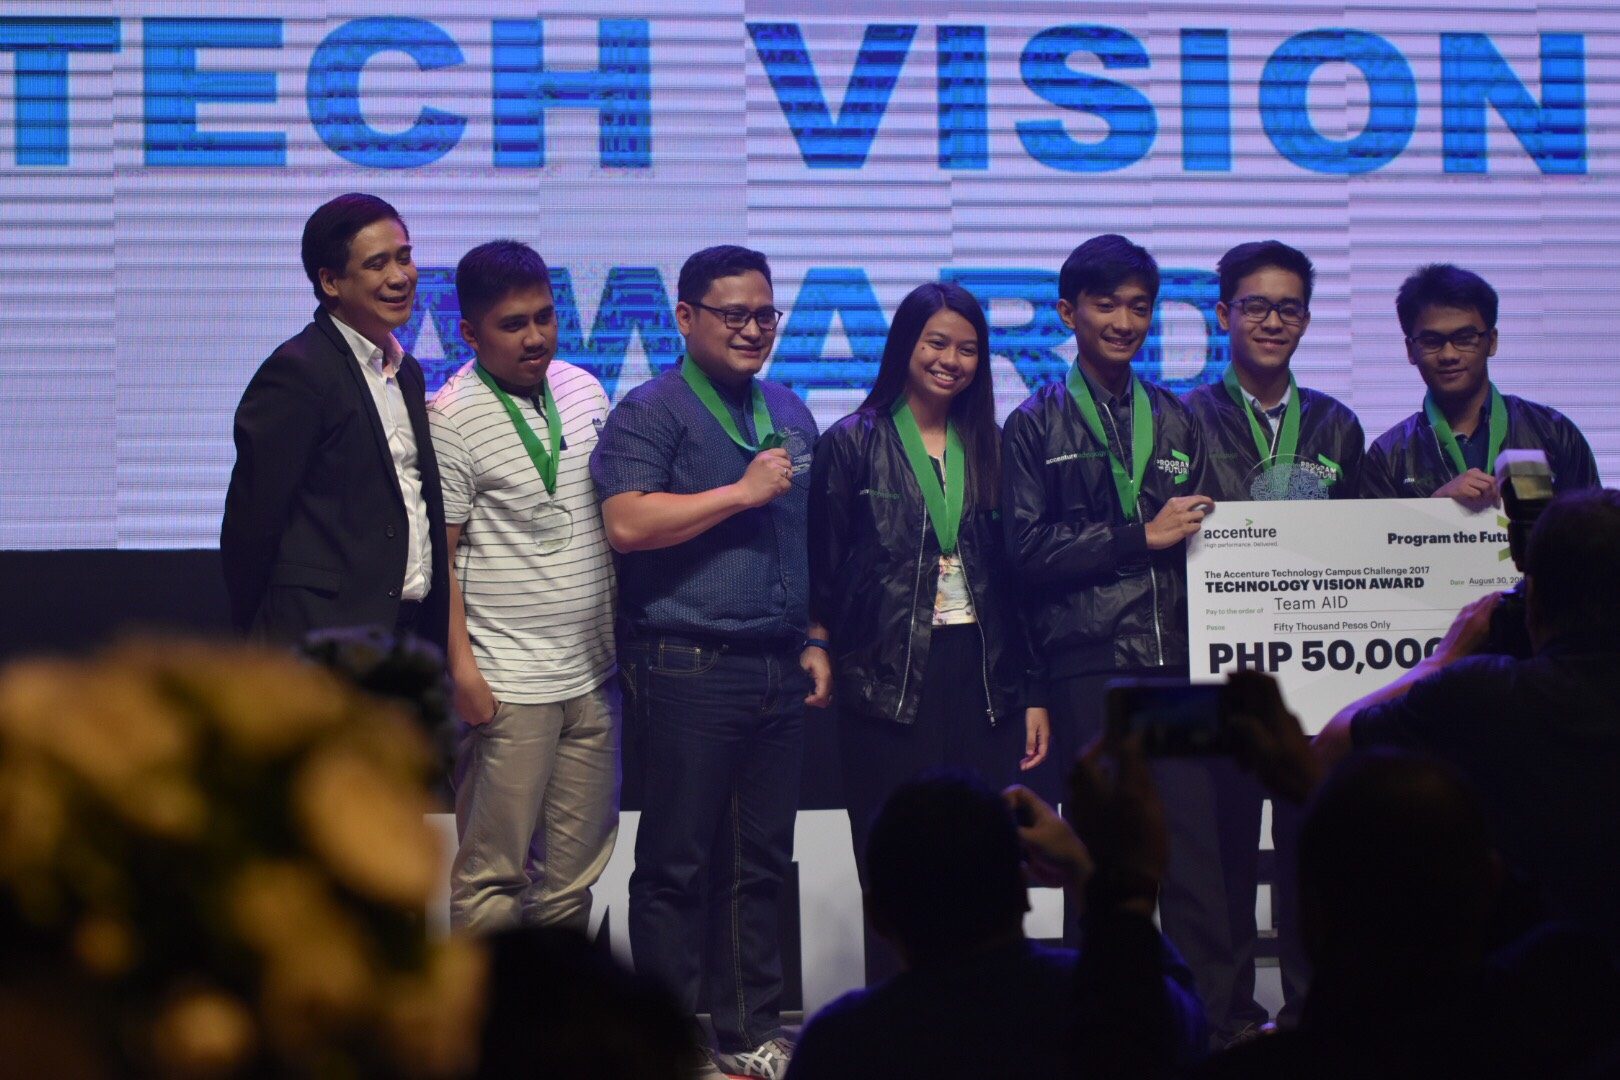 TECH VISION AWARD. Team AID from the University of San Carlos won P50,000 for their efforts in applying technology trends to their app.  